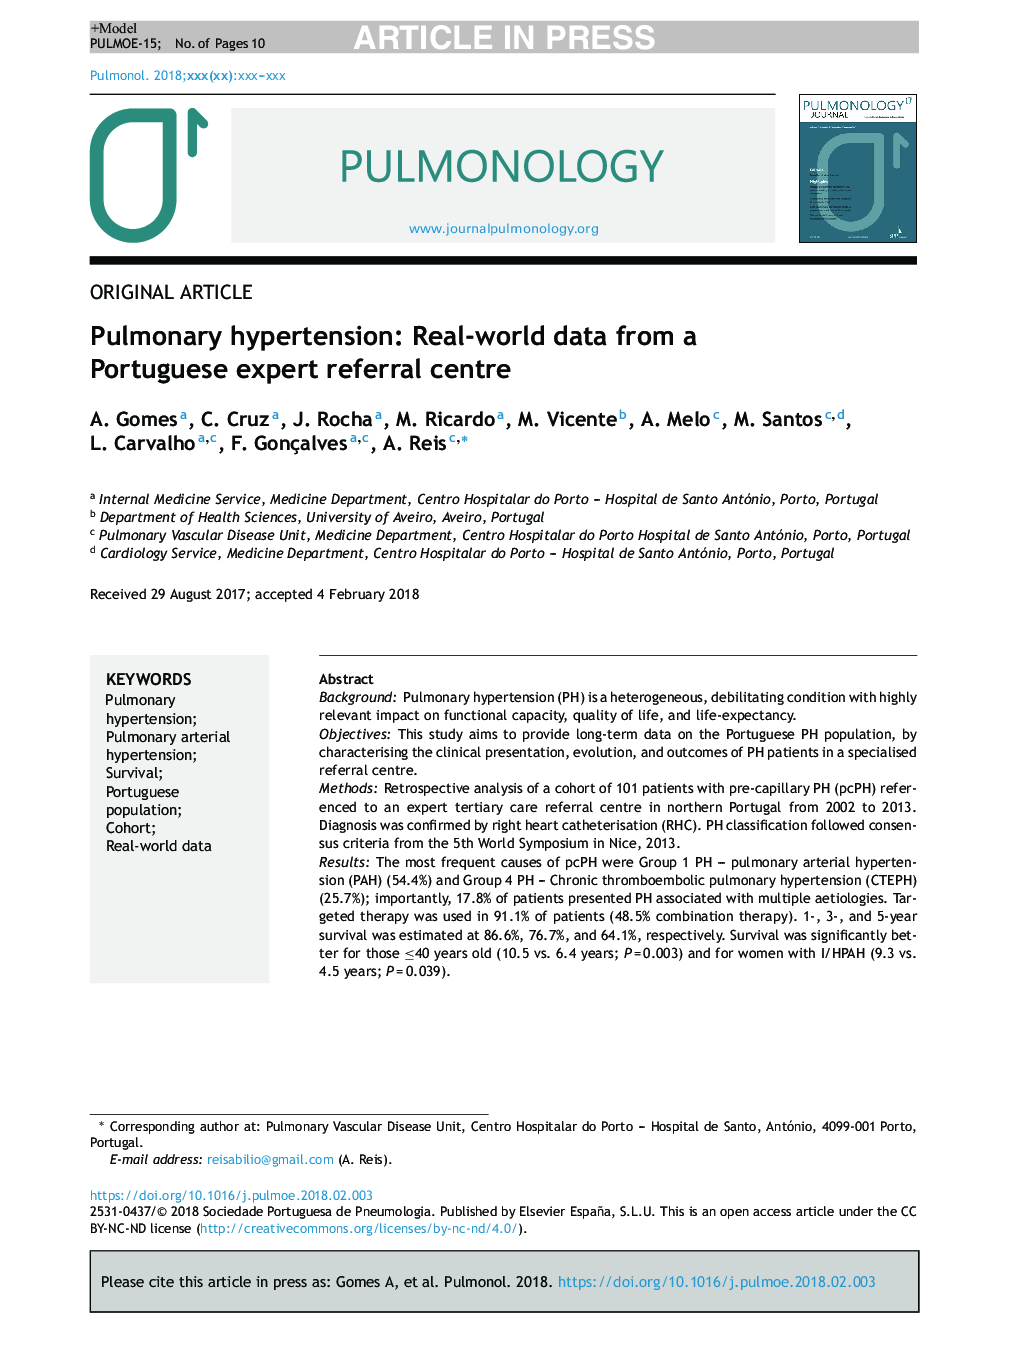 Pulmonary hypertension: Real-world data from a Portuguese expert referral centre